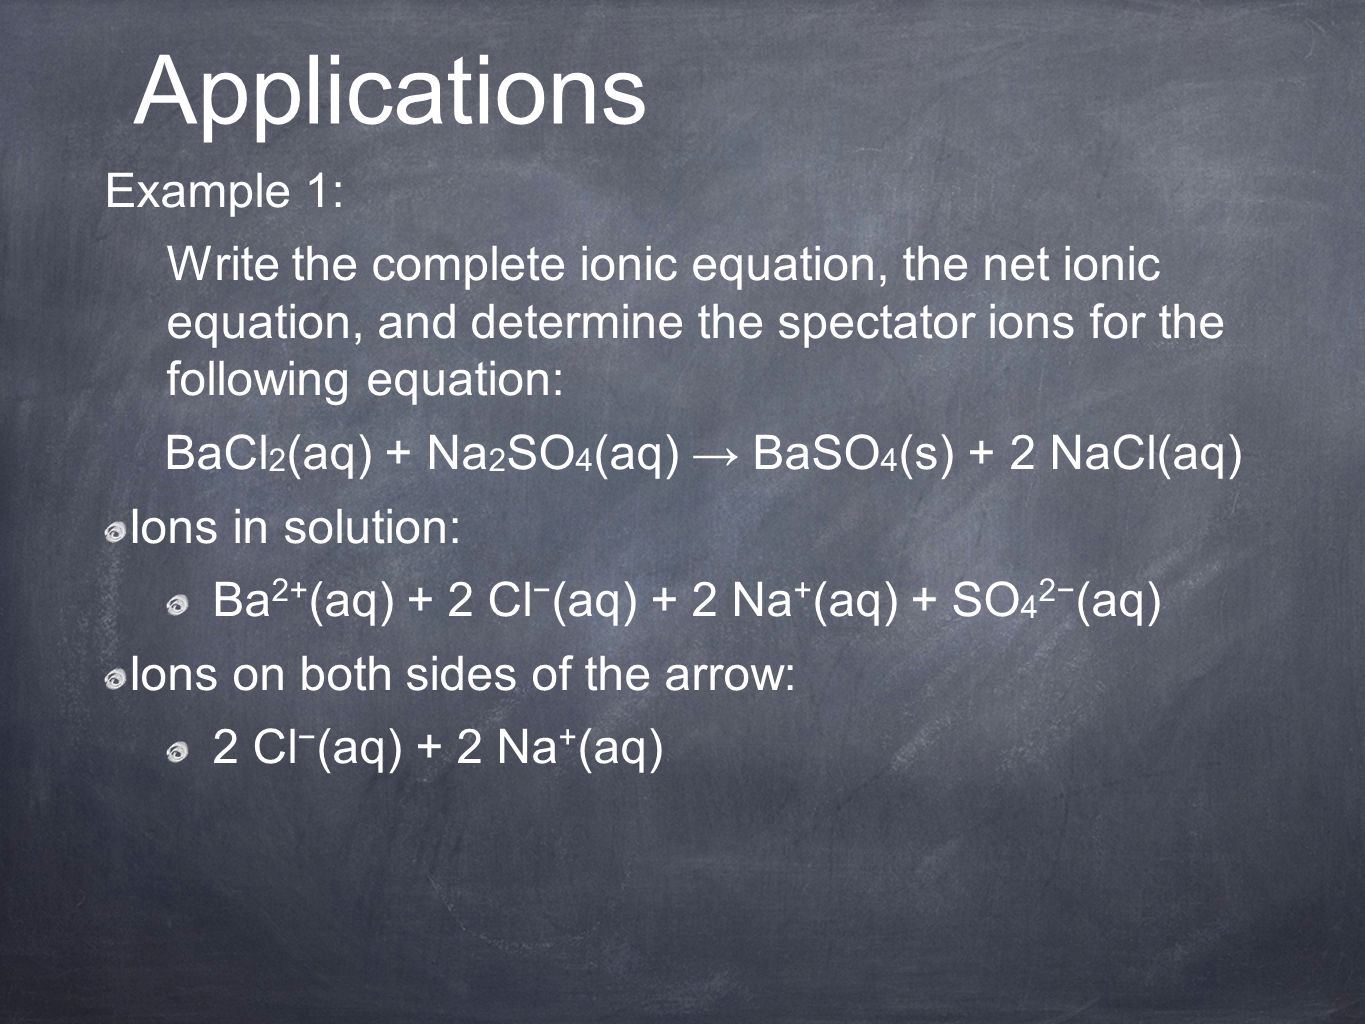 Example 1: Write the complete ionic equation, the net ionic equation, and determine the spectator ions for the following equation: BaCl 2 (aq) + Na 2 SO 4 (aq) → BaSO 4 (s) + 2 NaCl(aq) Ions in solution: Ba 2+ (aq) + 2 Cl − (aq) + 2 Na + (aq) + SO 4 2− (aq) Ions on both sides of the arrow: 2 Cl − (aq) + 2 Na + (aq) Applications